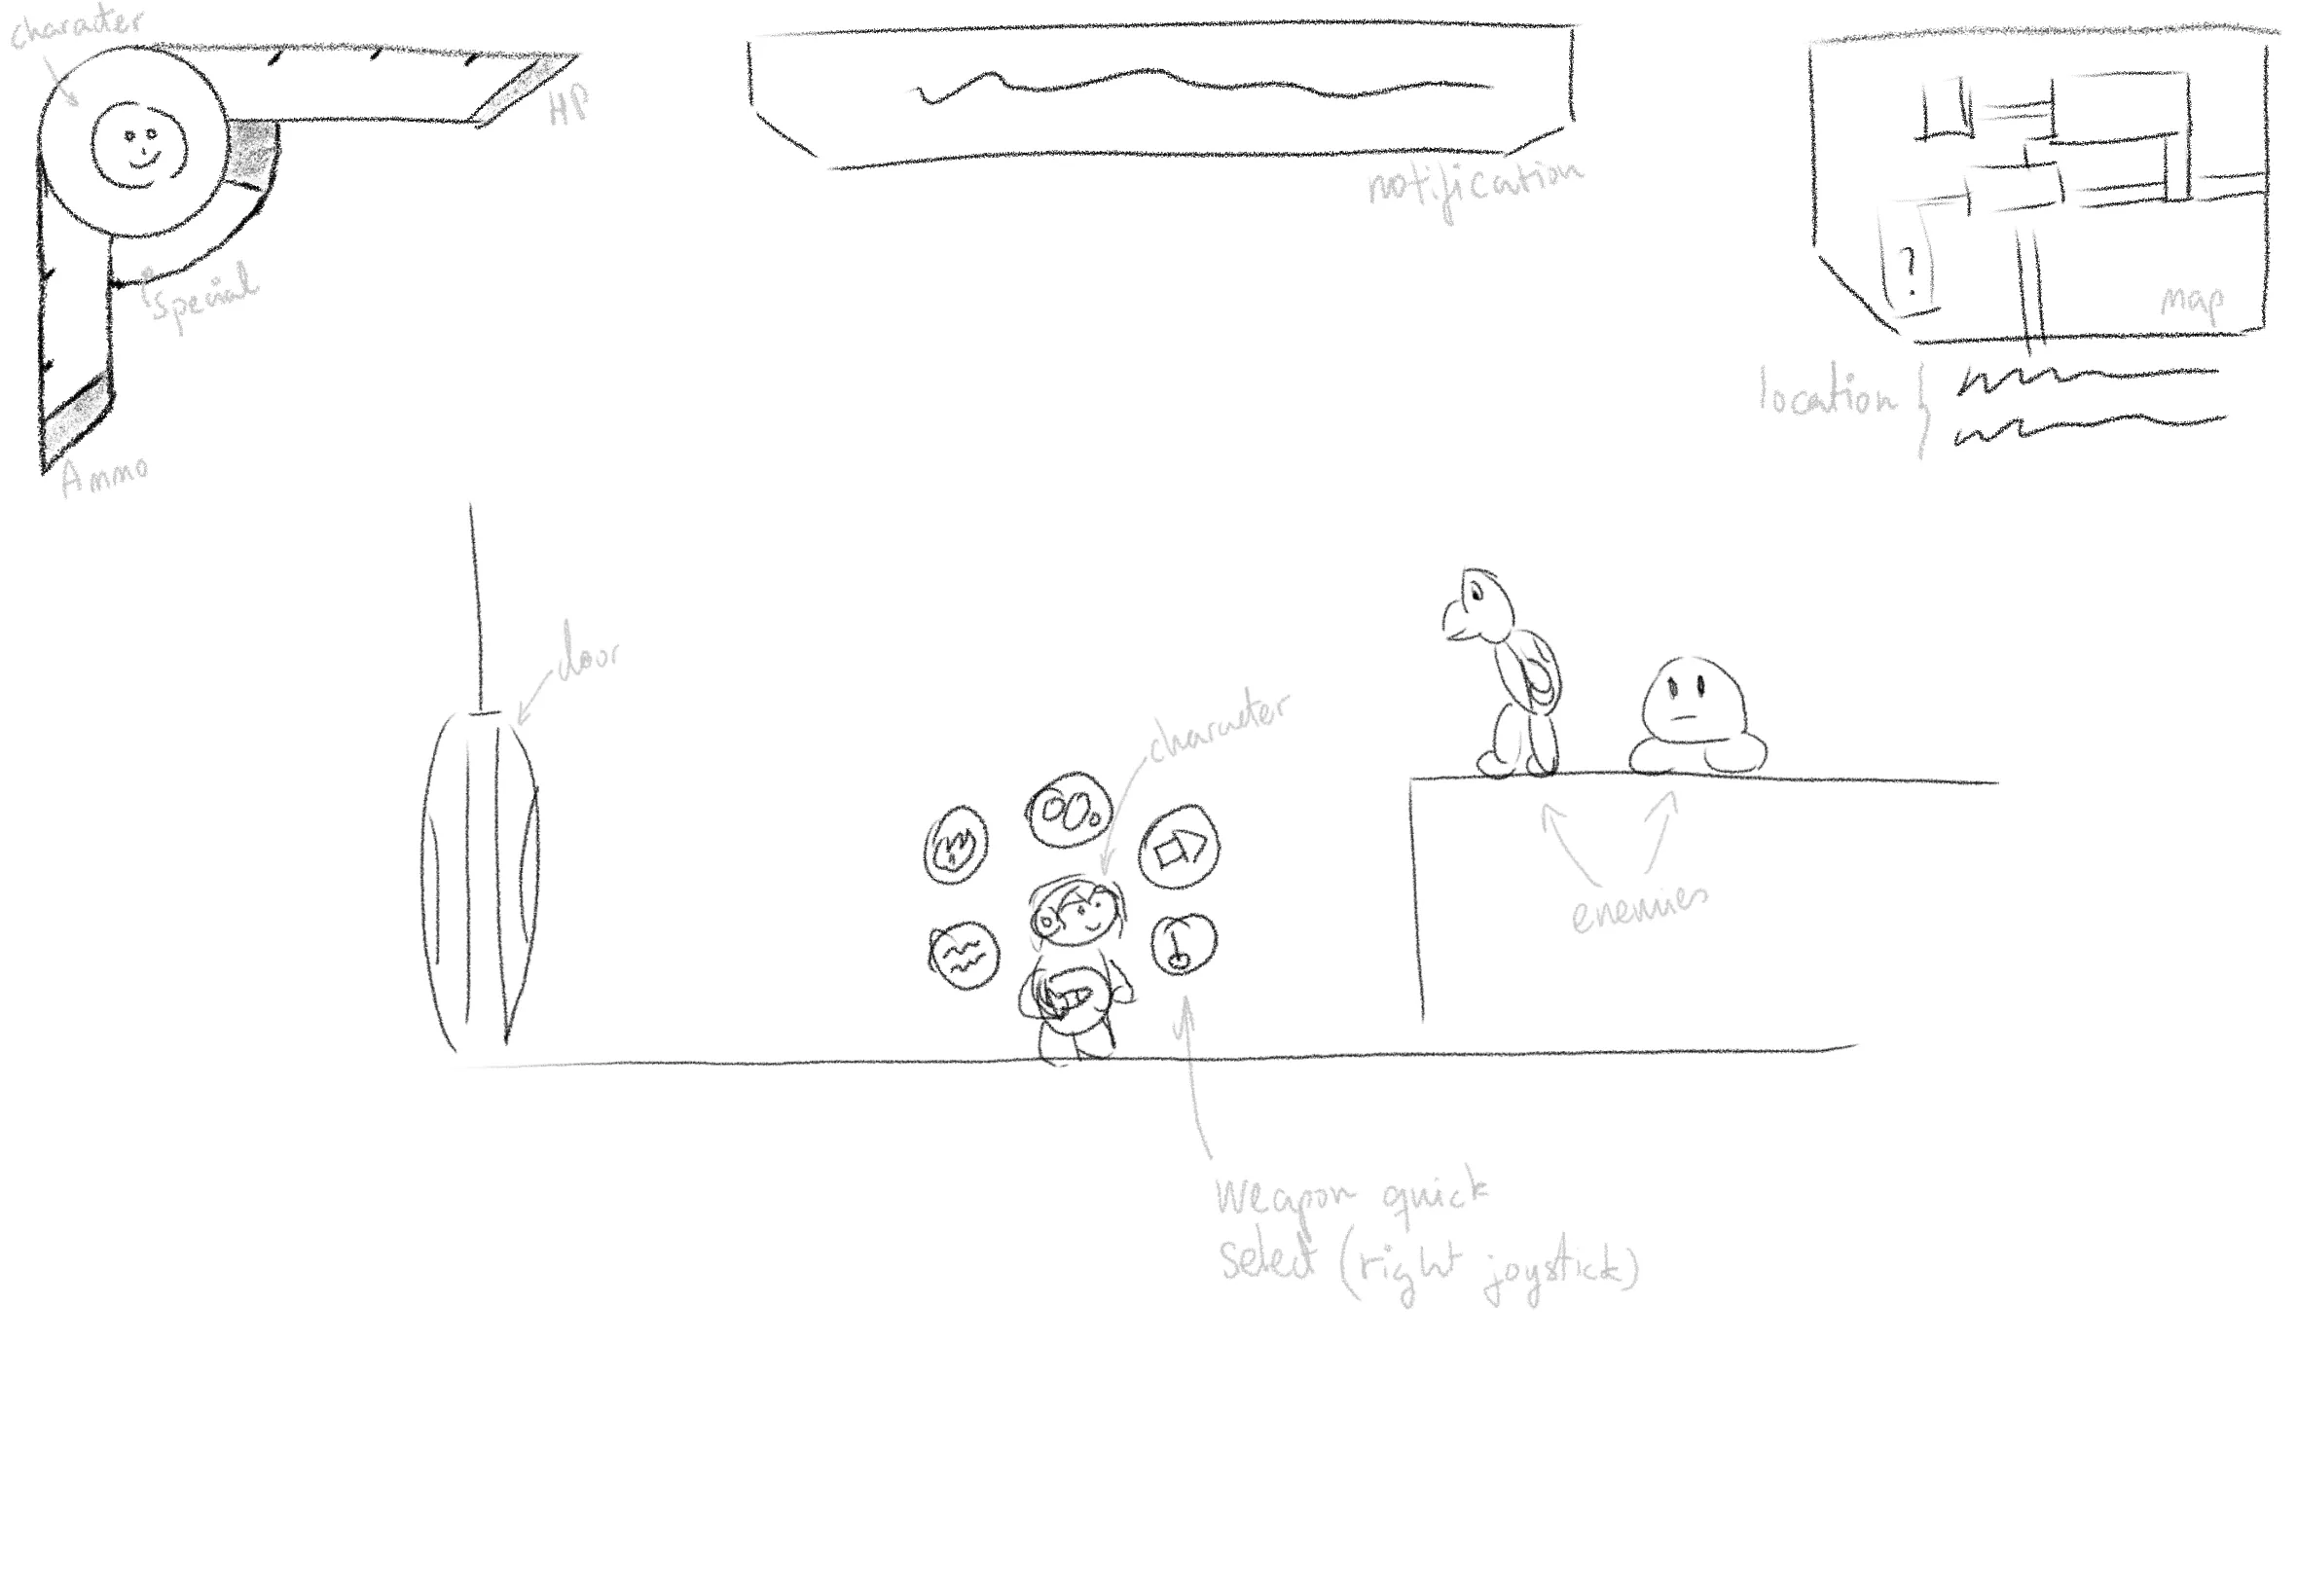 A sketch of the game screen